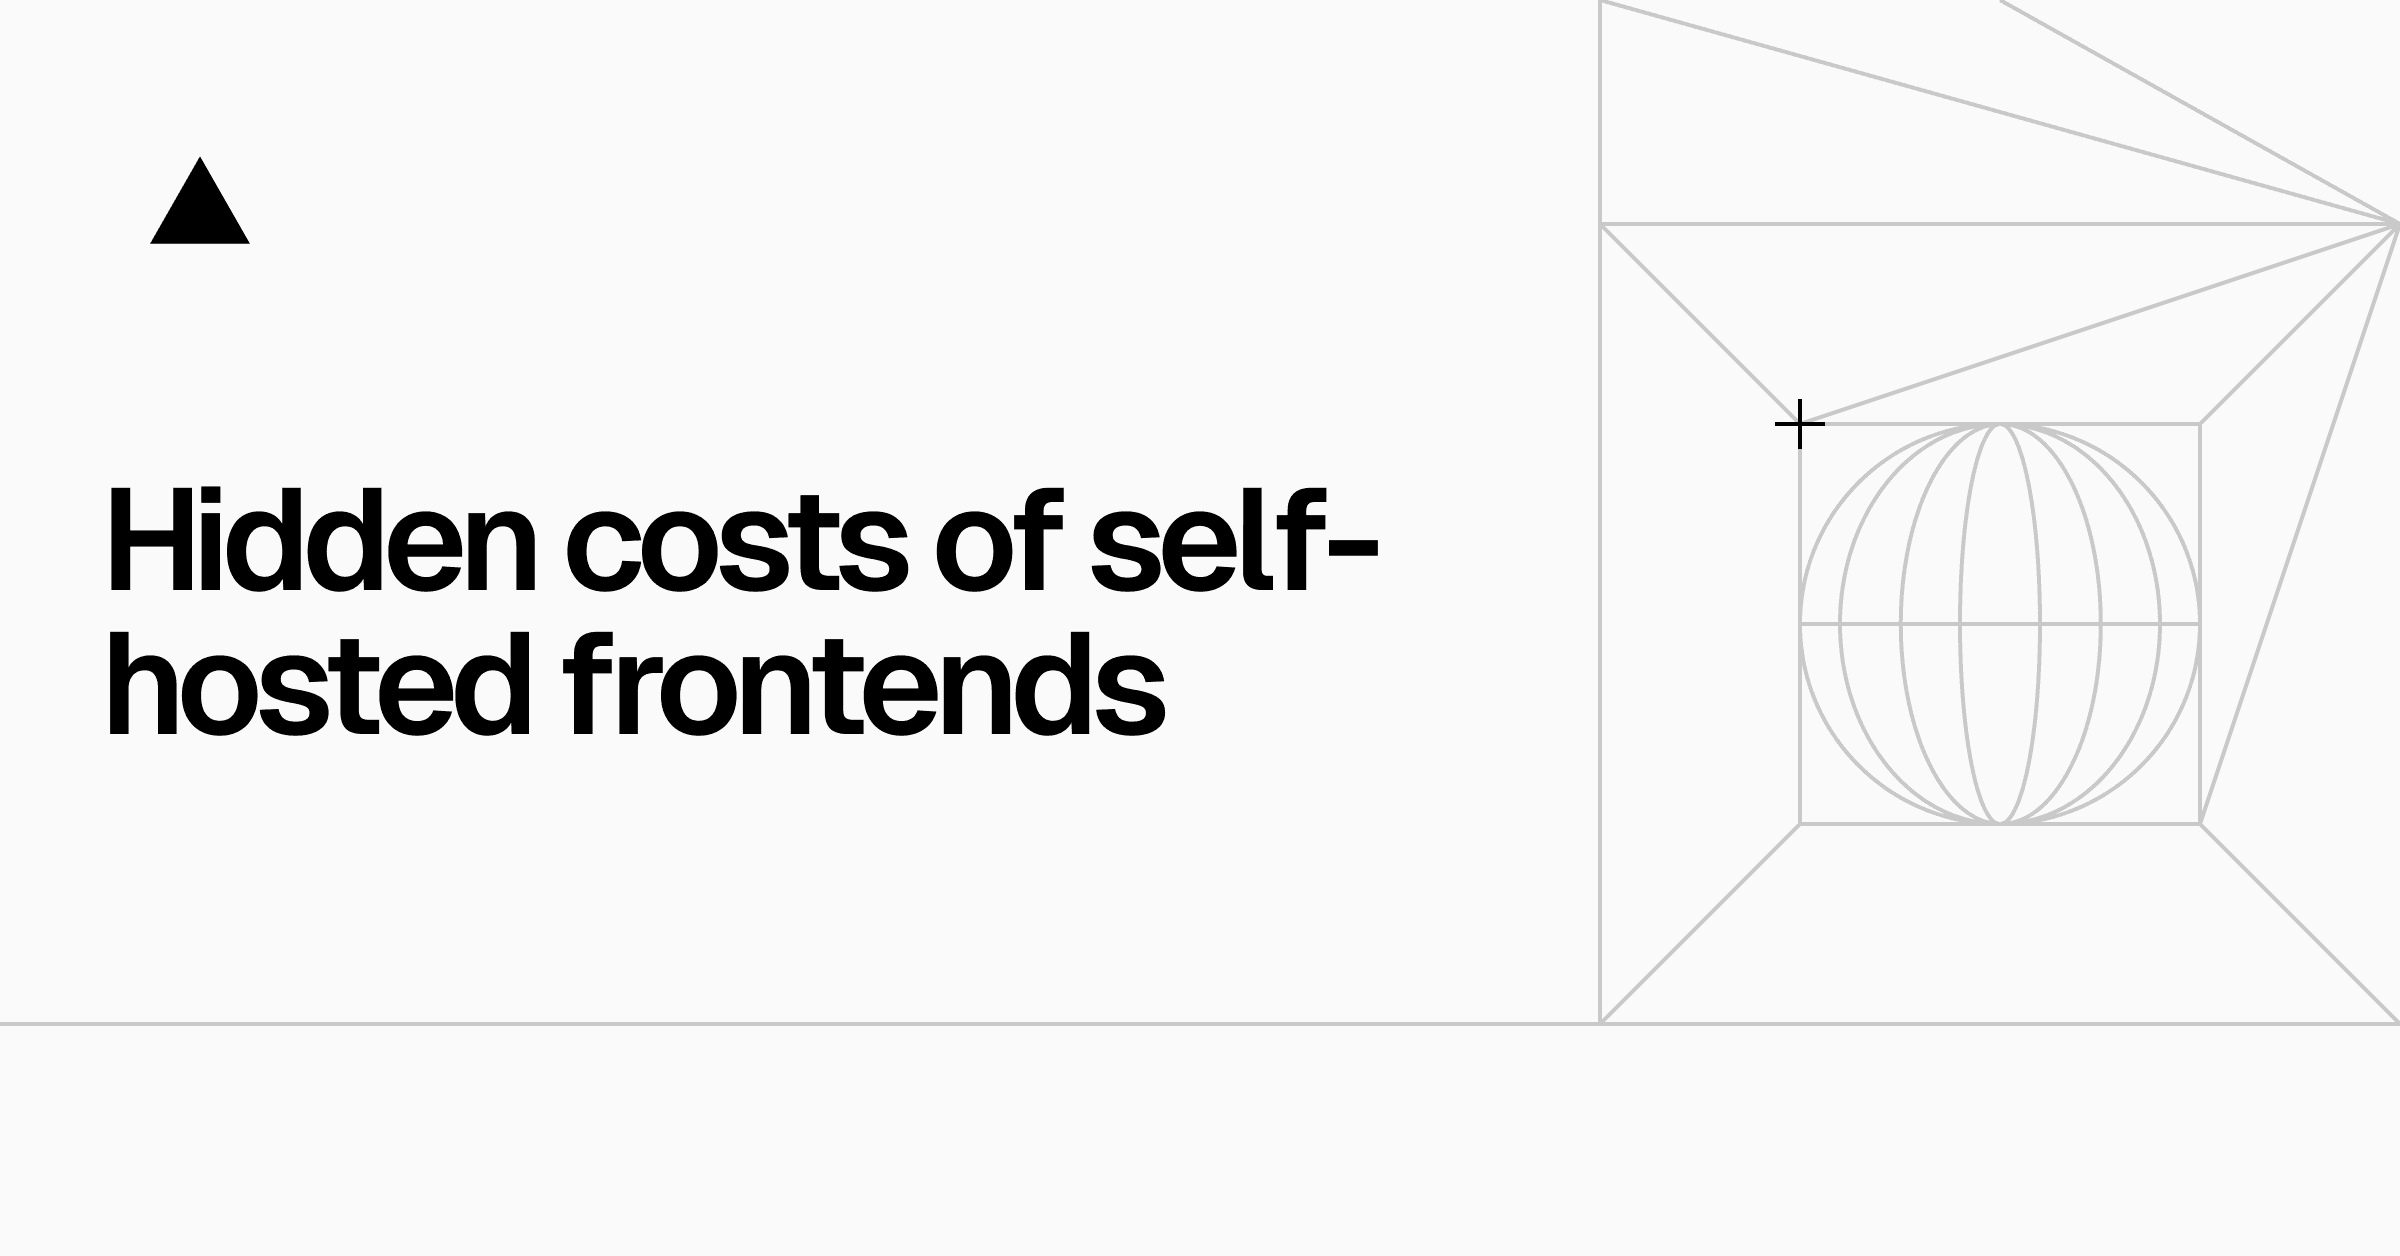 Hidden costs of self-hosted frontends